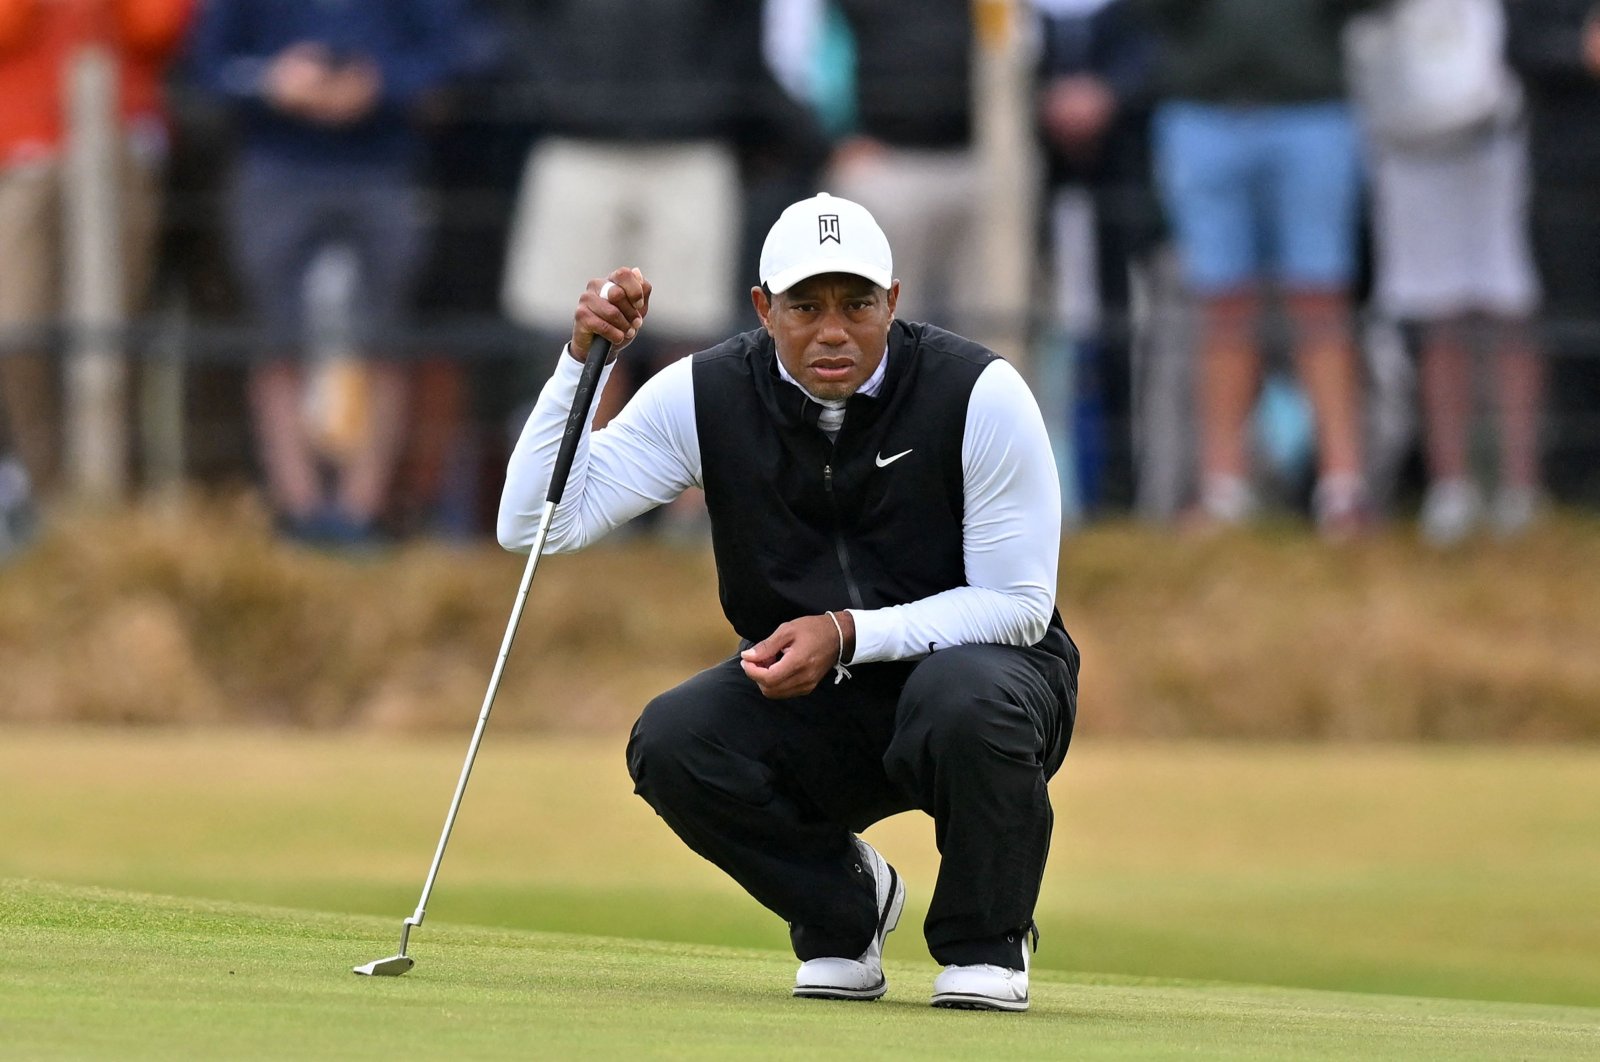 U.S. golfer Tiger Woods lines up a putt on the third green during his second round on Day 2 of the 150th British Open Golf Championship on the Old Course at St. Andrews, Edinburgh, Scotland, July 15, 2022. (AFP Photo)